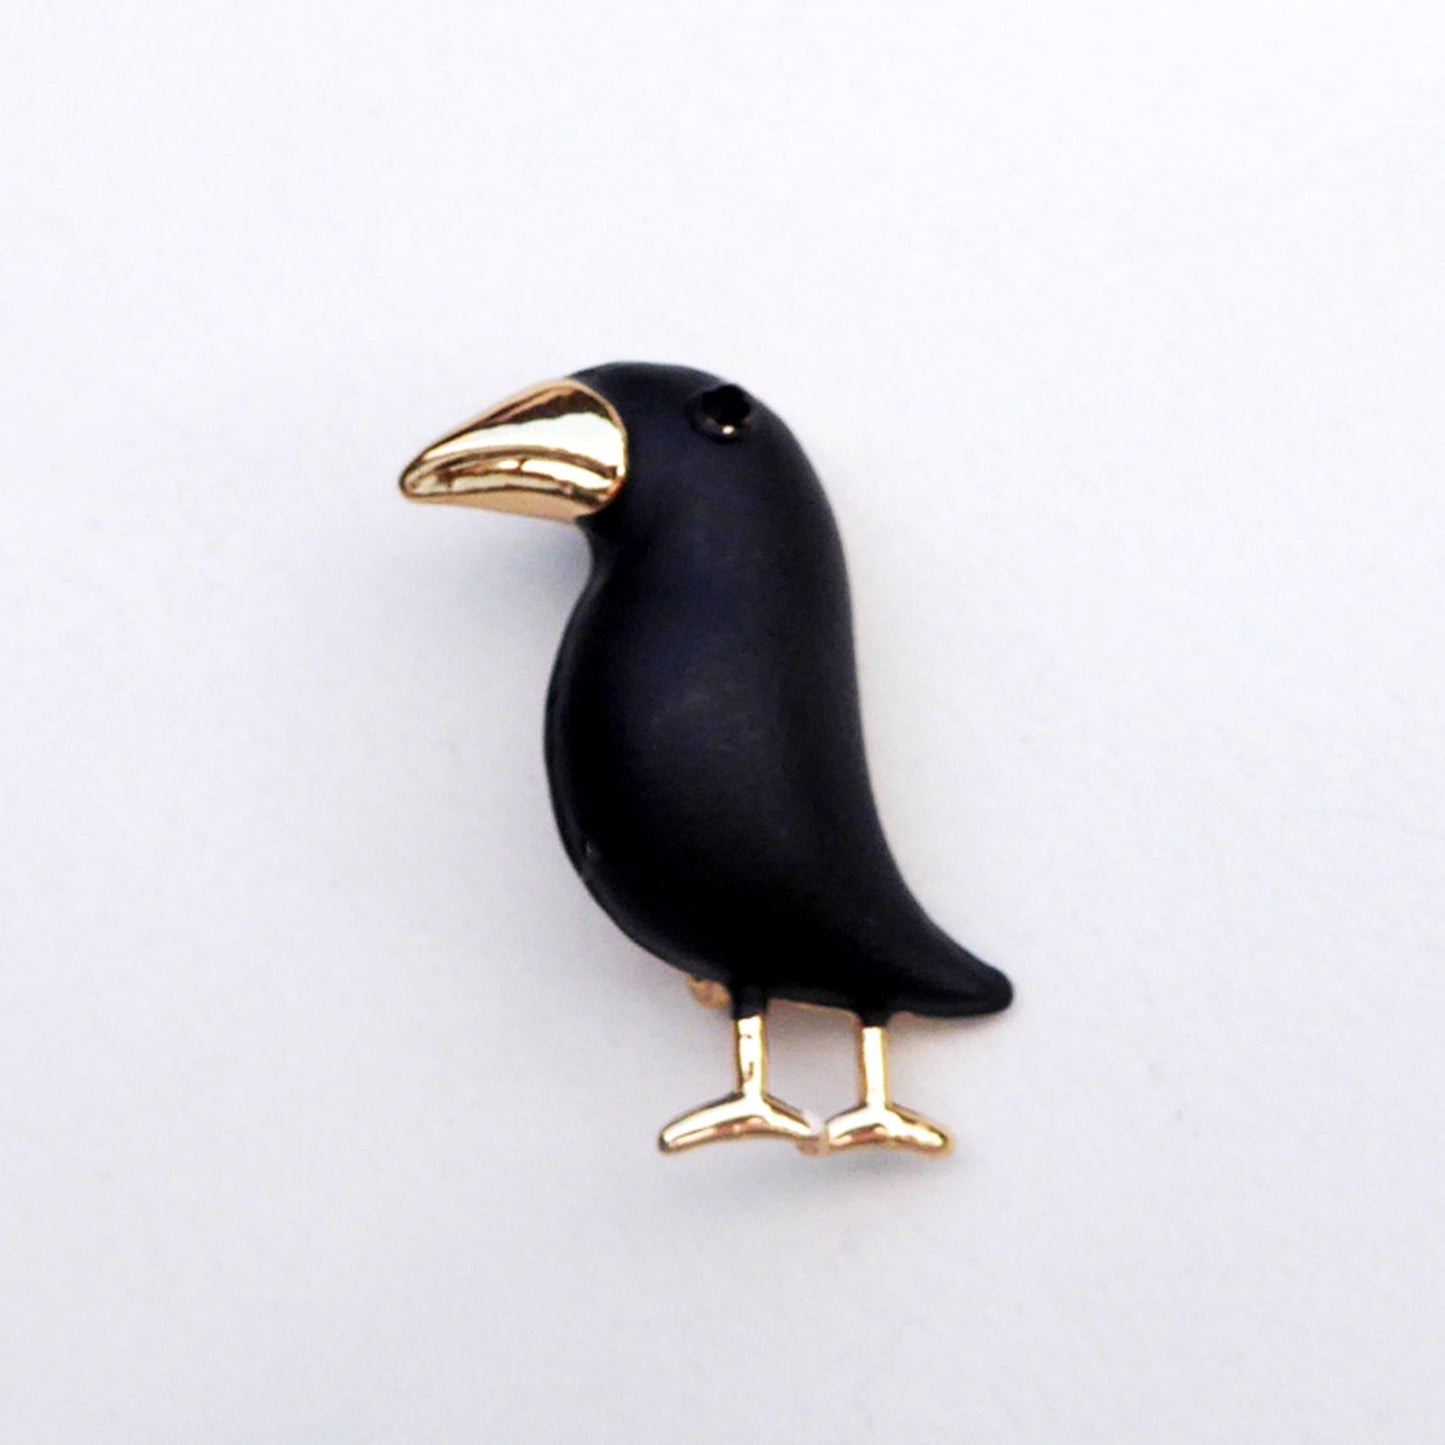 Black metal bird with gold plated feet and beak